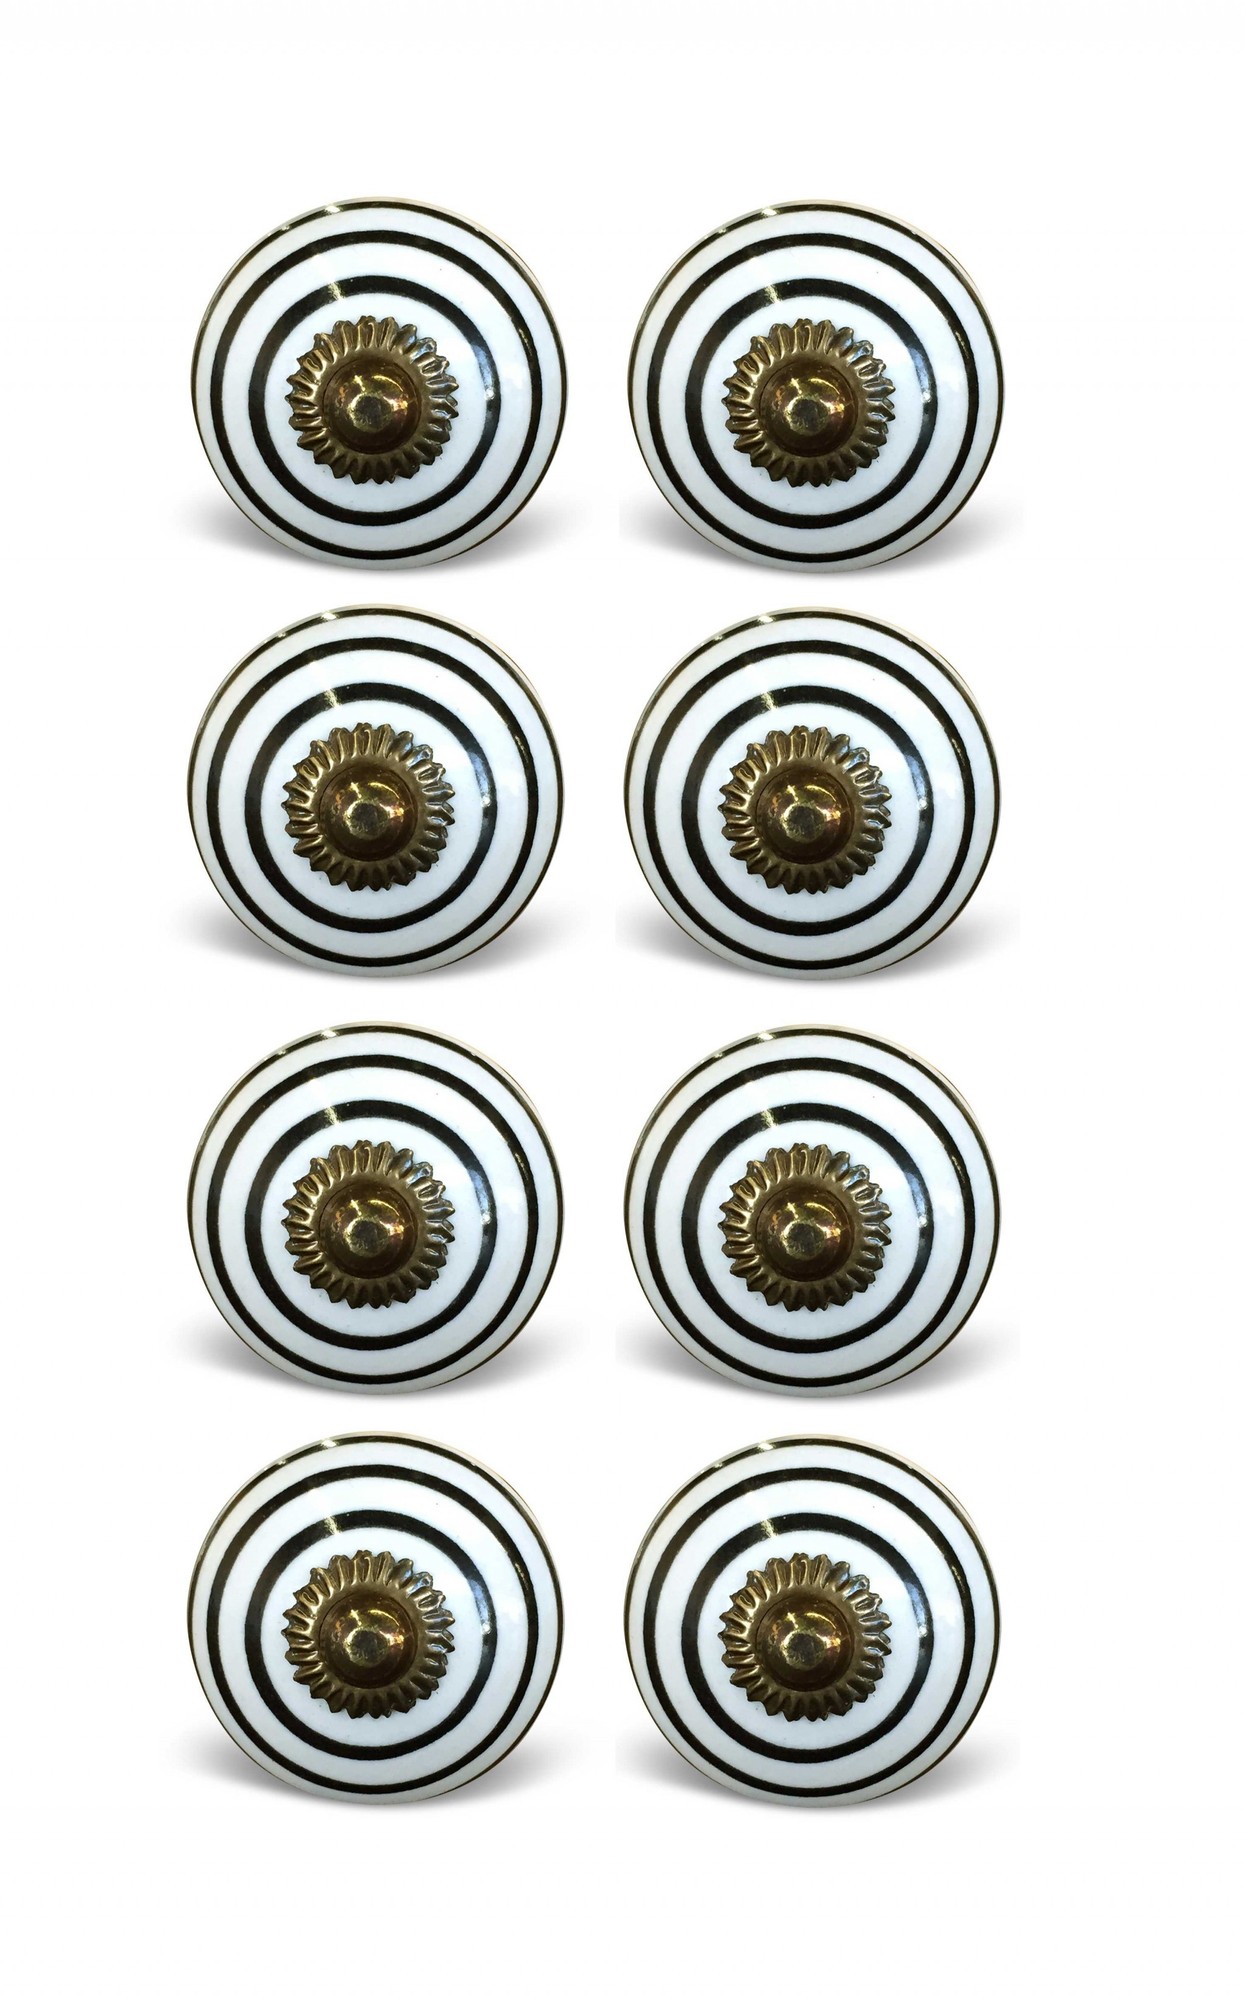 1.5" x 1.5" x 1.5" Hues Of Bronze, White And Black - Knobs 8-Pack